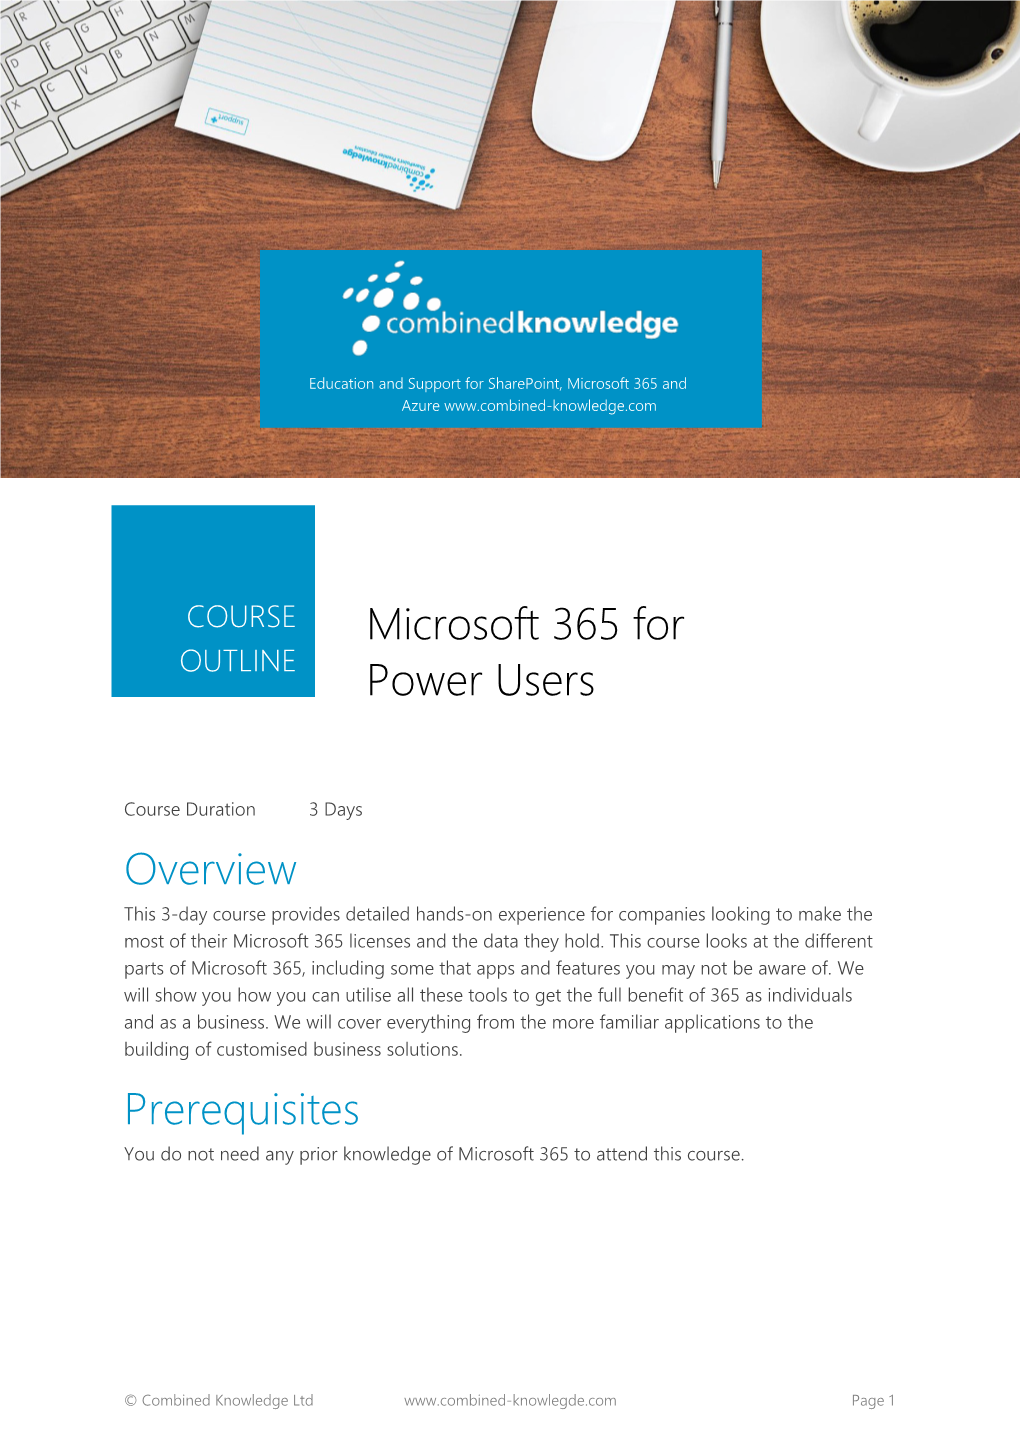 Microsoft 365 for Power Users Overview Prerequisites